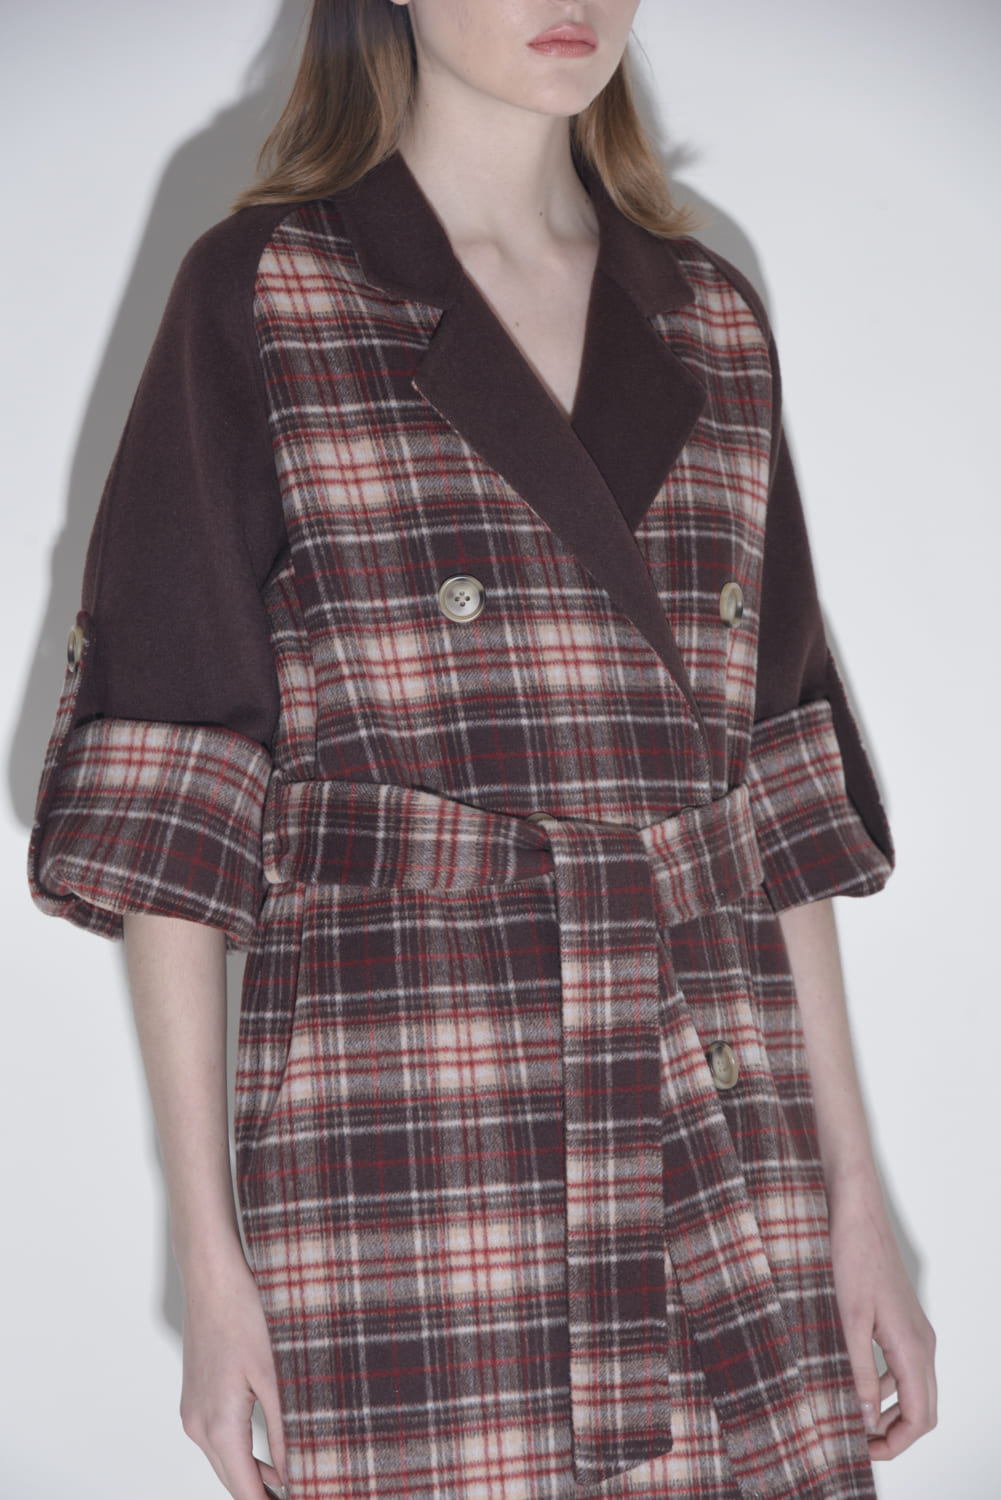 Red Plaid Coat with Coffee Color Sleeves and Patchwork - By Quaint